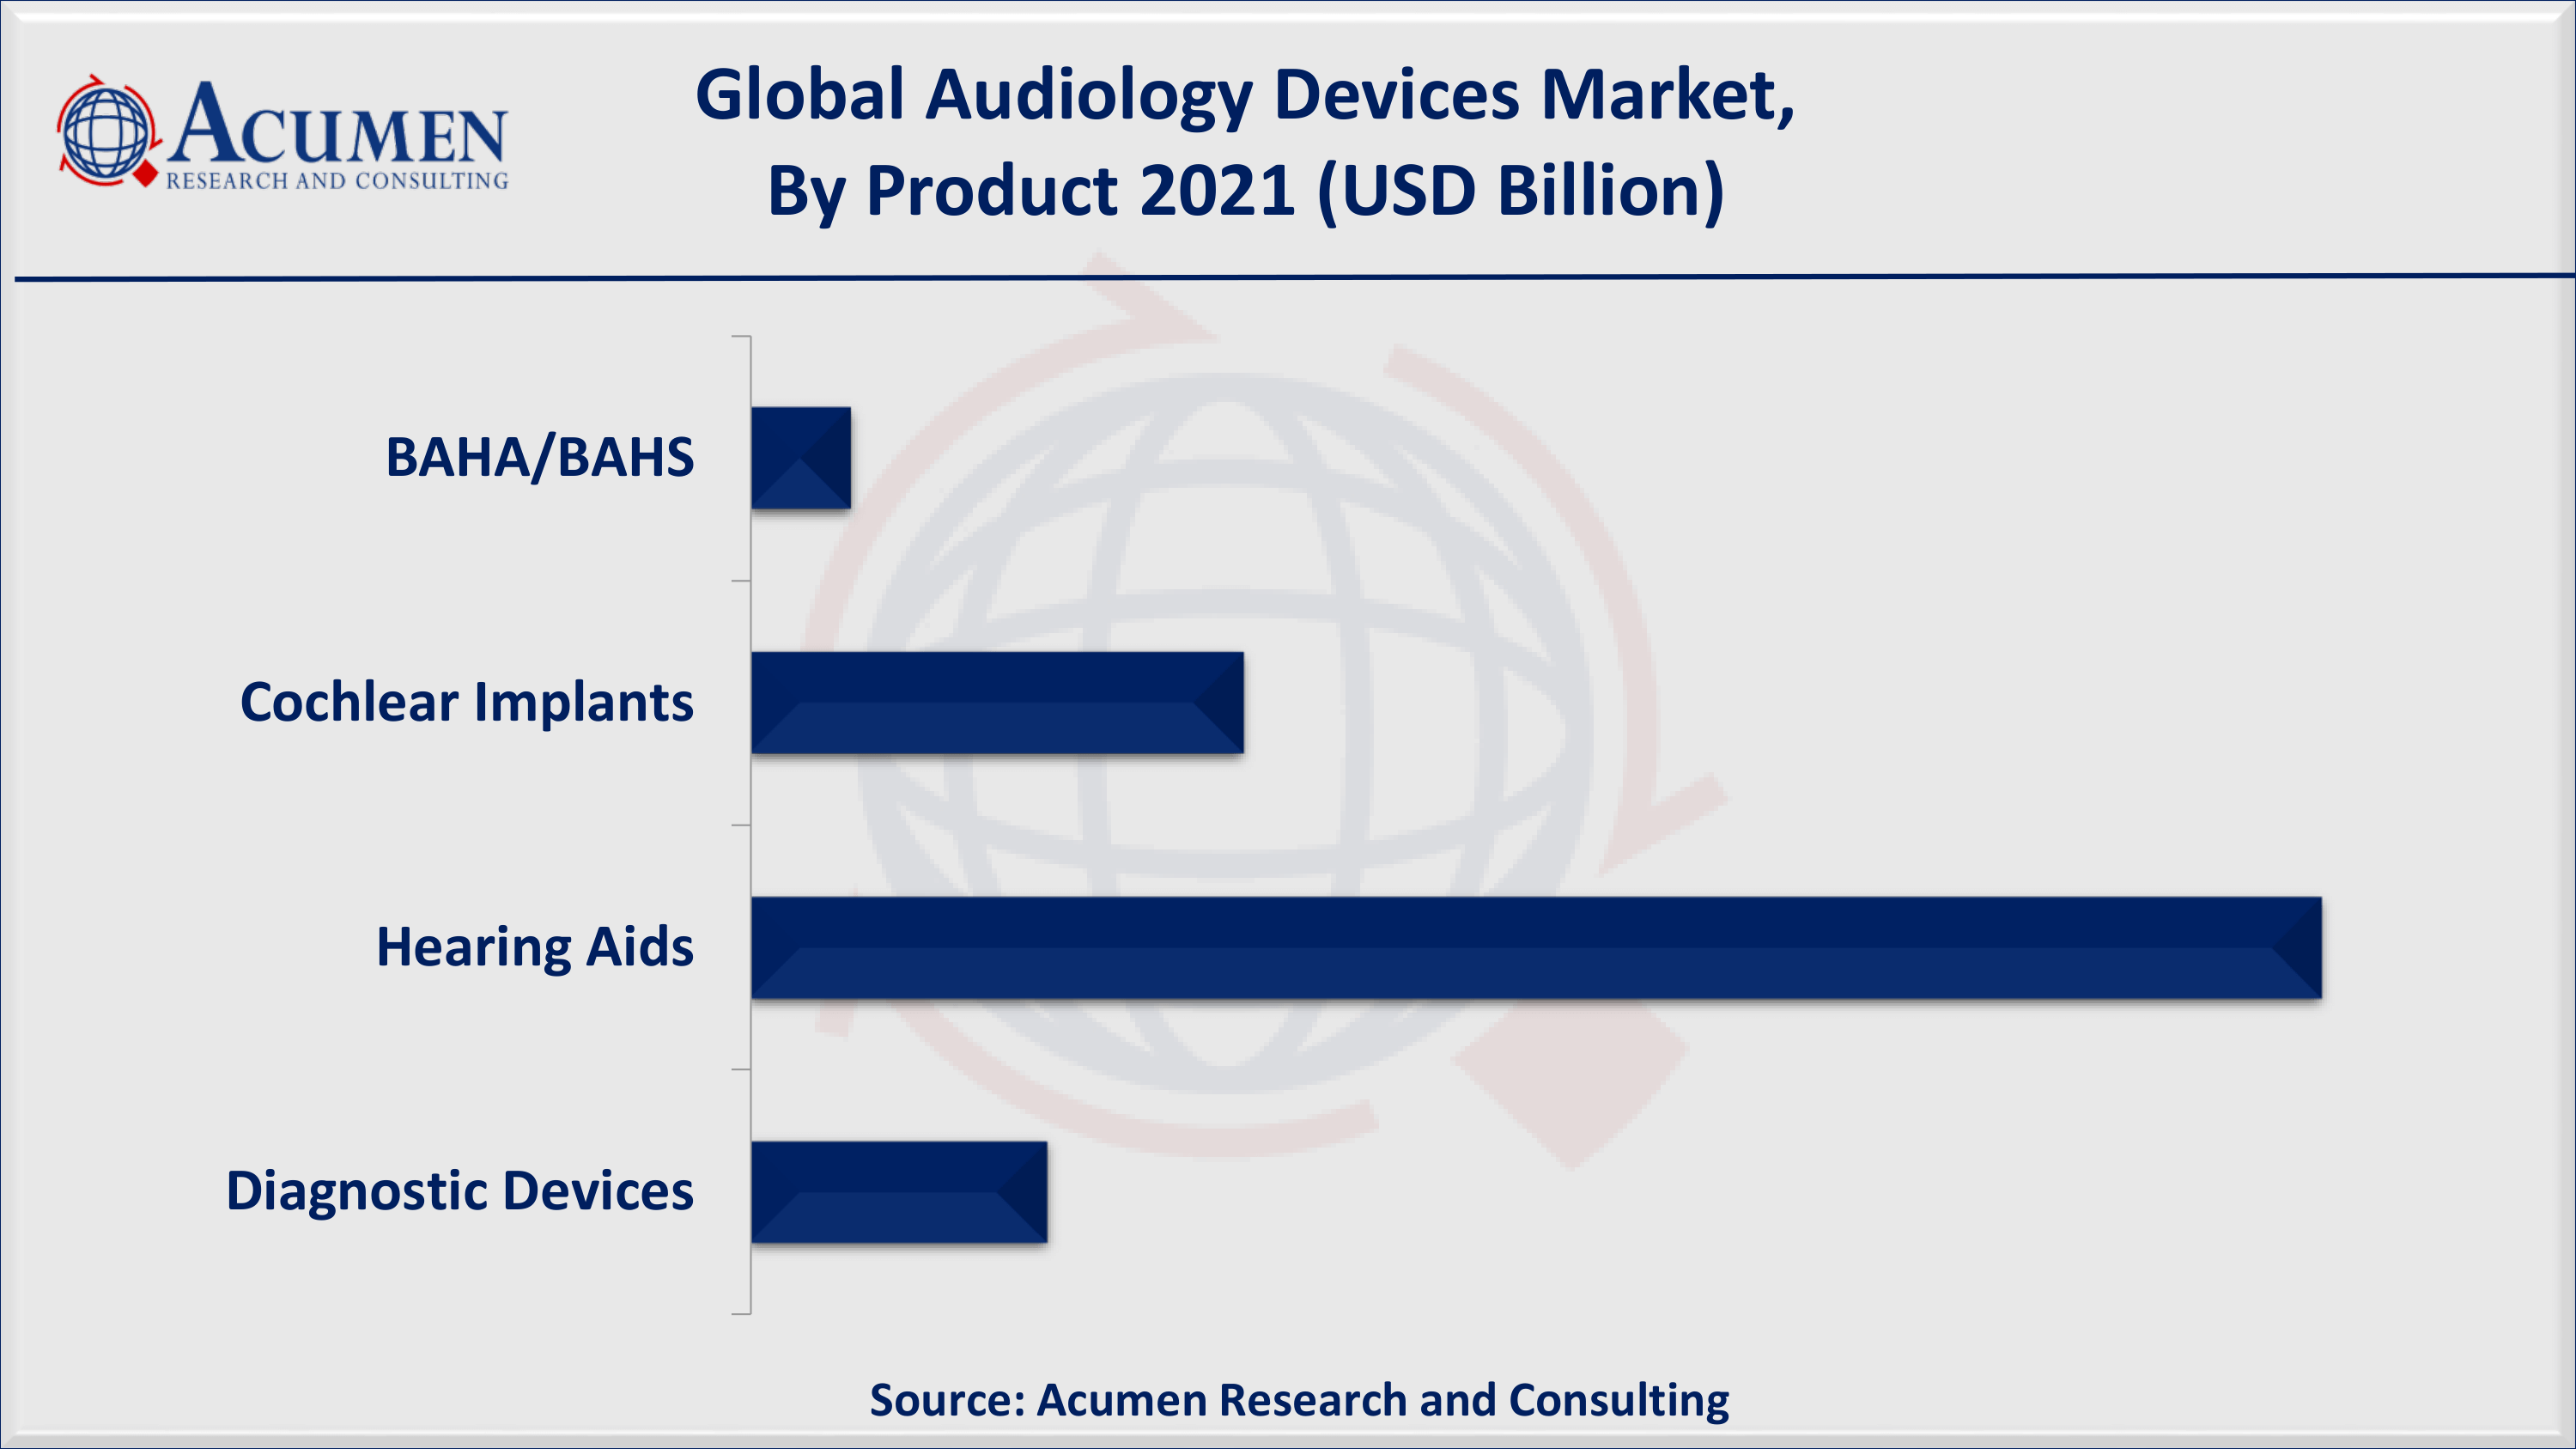 Based on product, hearing aids accounted for over 60% of the overall market share in 2021